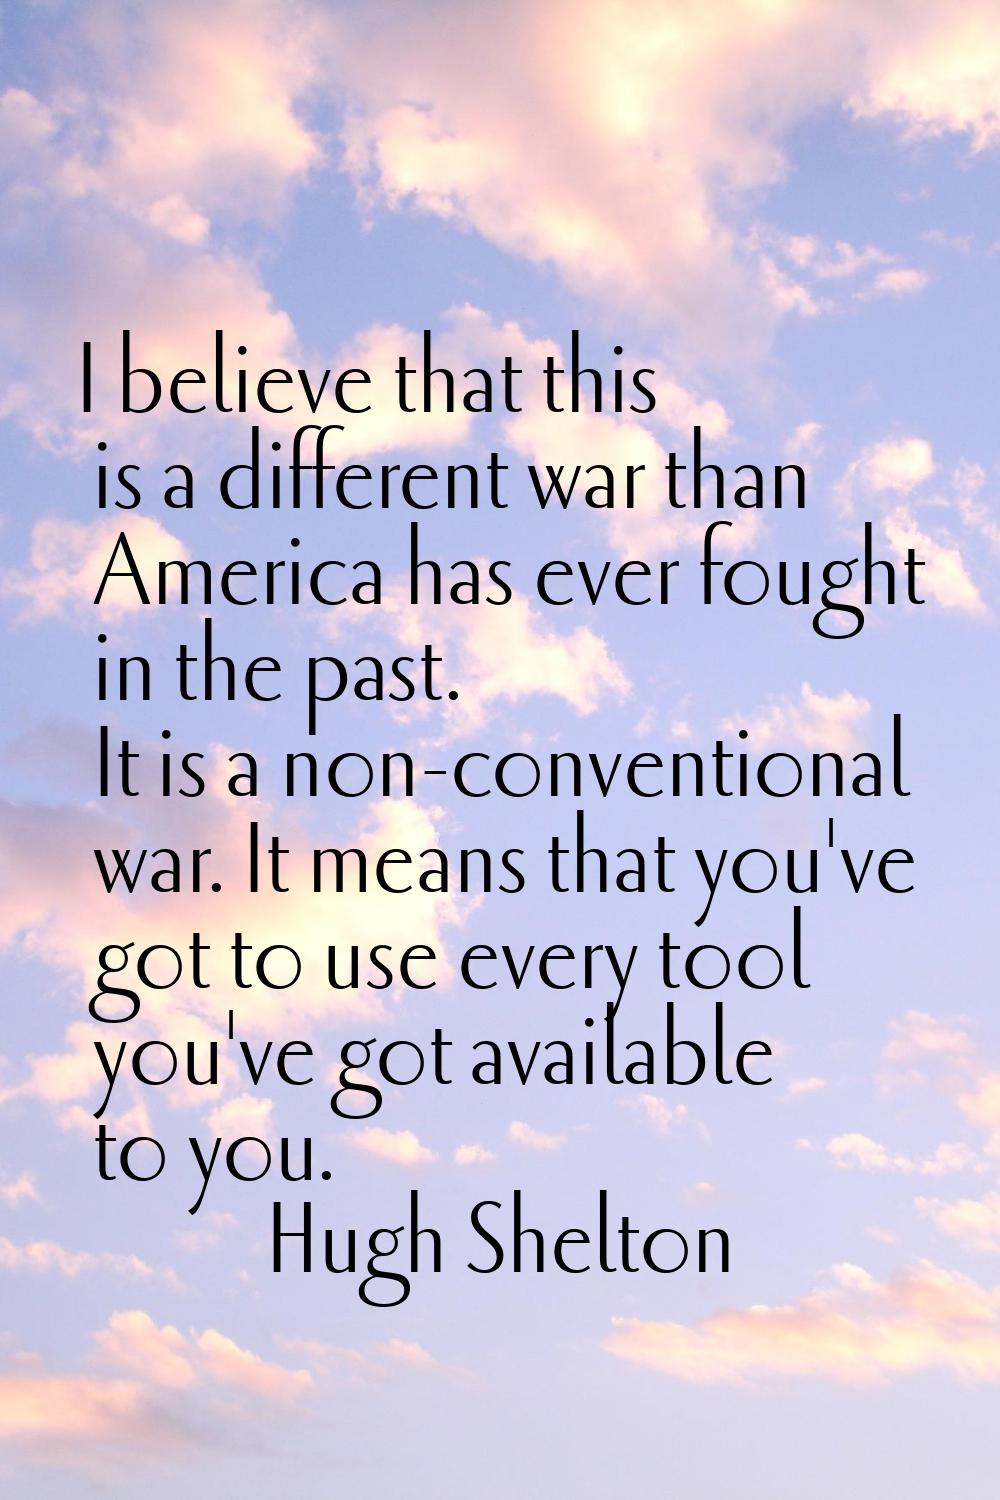 I believe that this is a different war than America has ever fought in the past. It is a non-conven